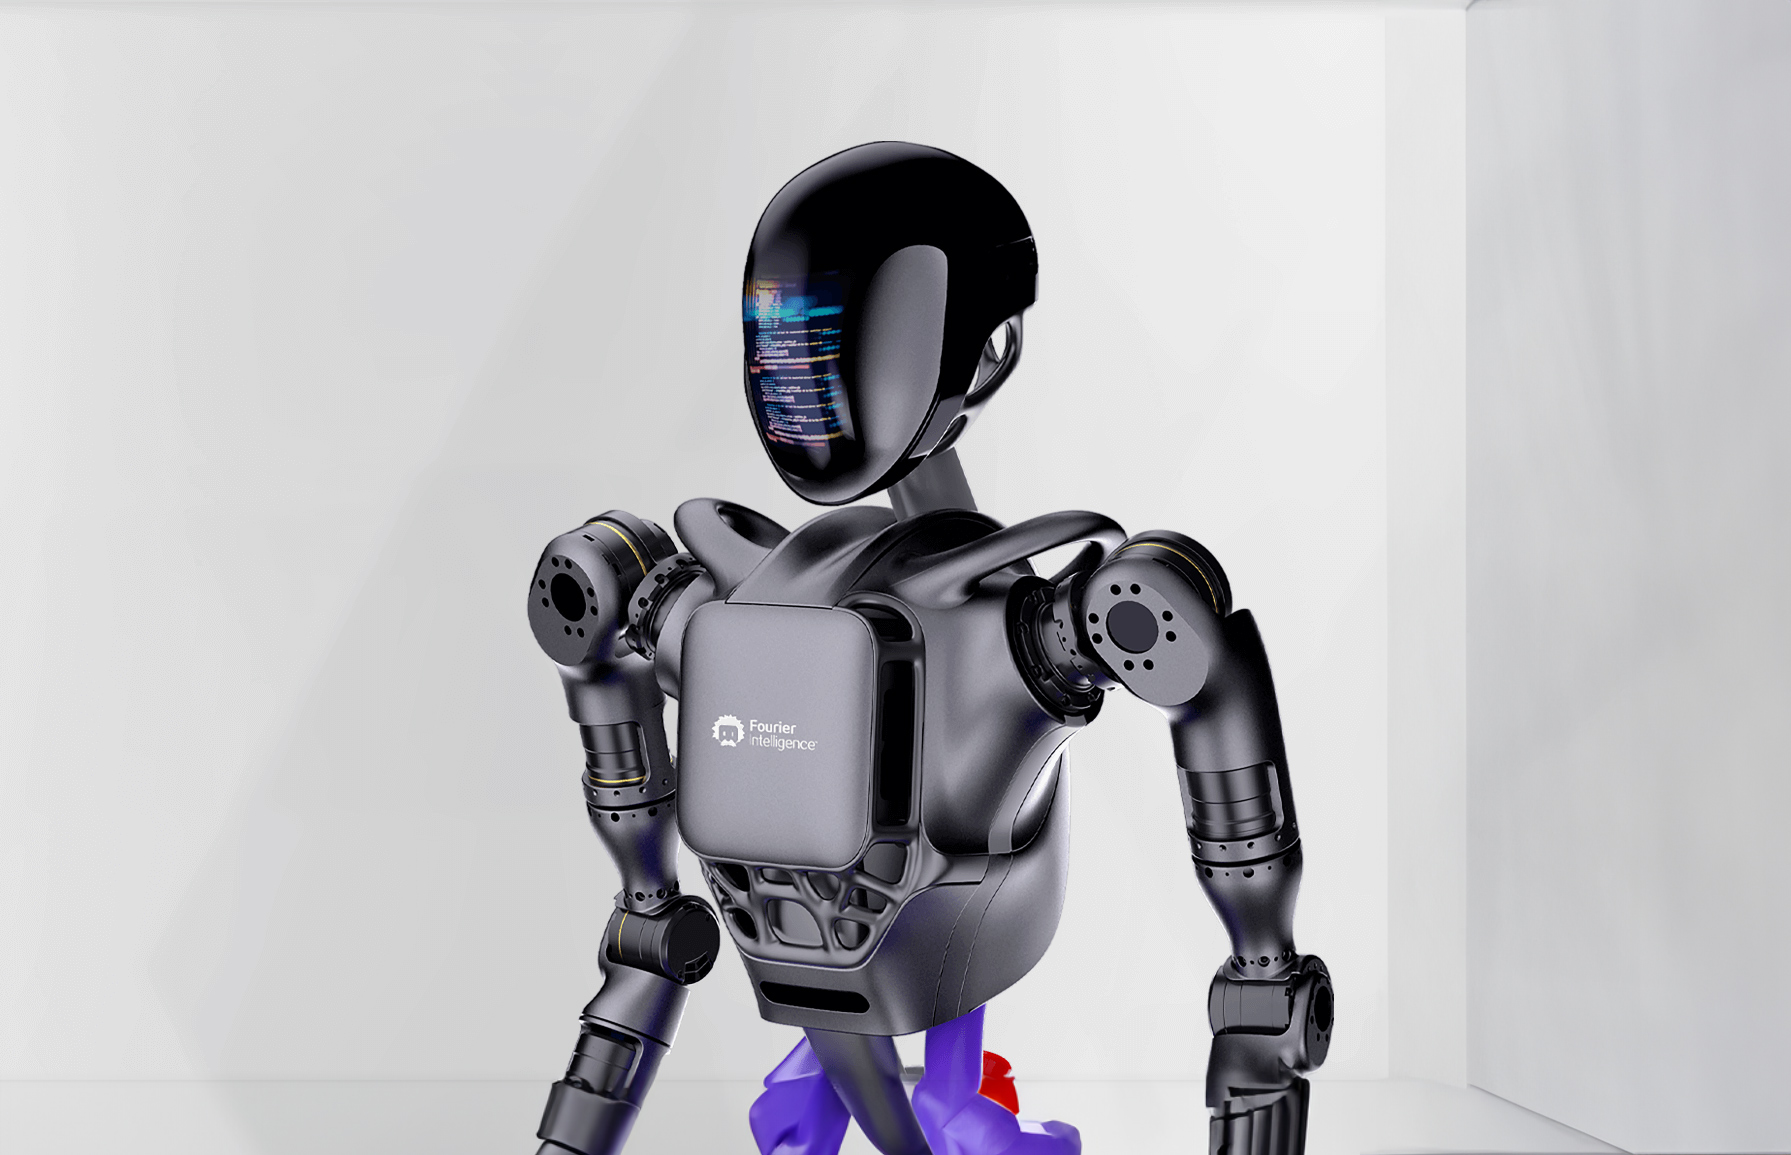 Fourier Intelligence GR1 is an impressive humanoid robot to compete